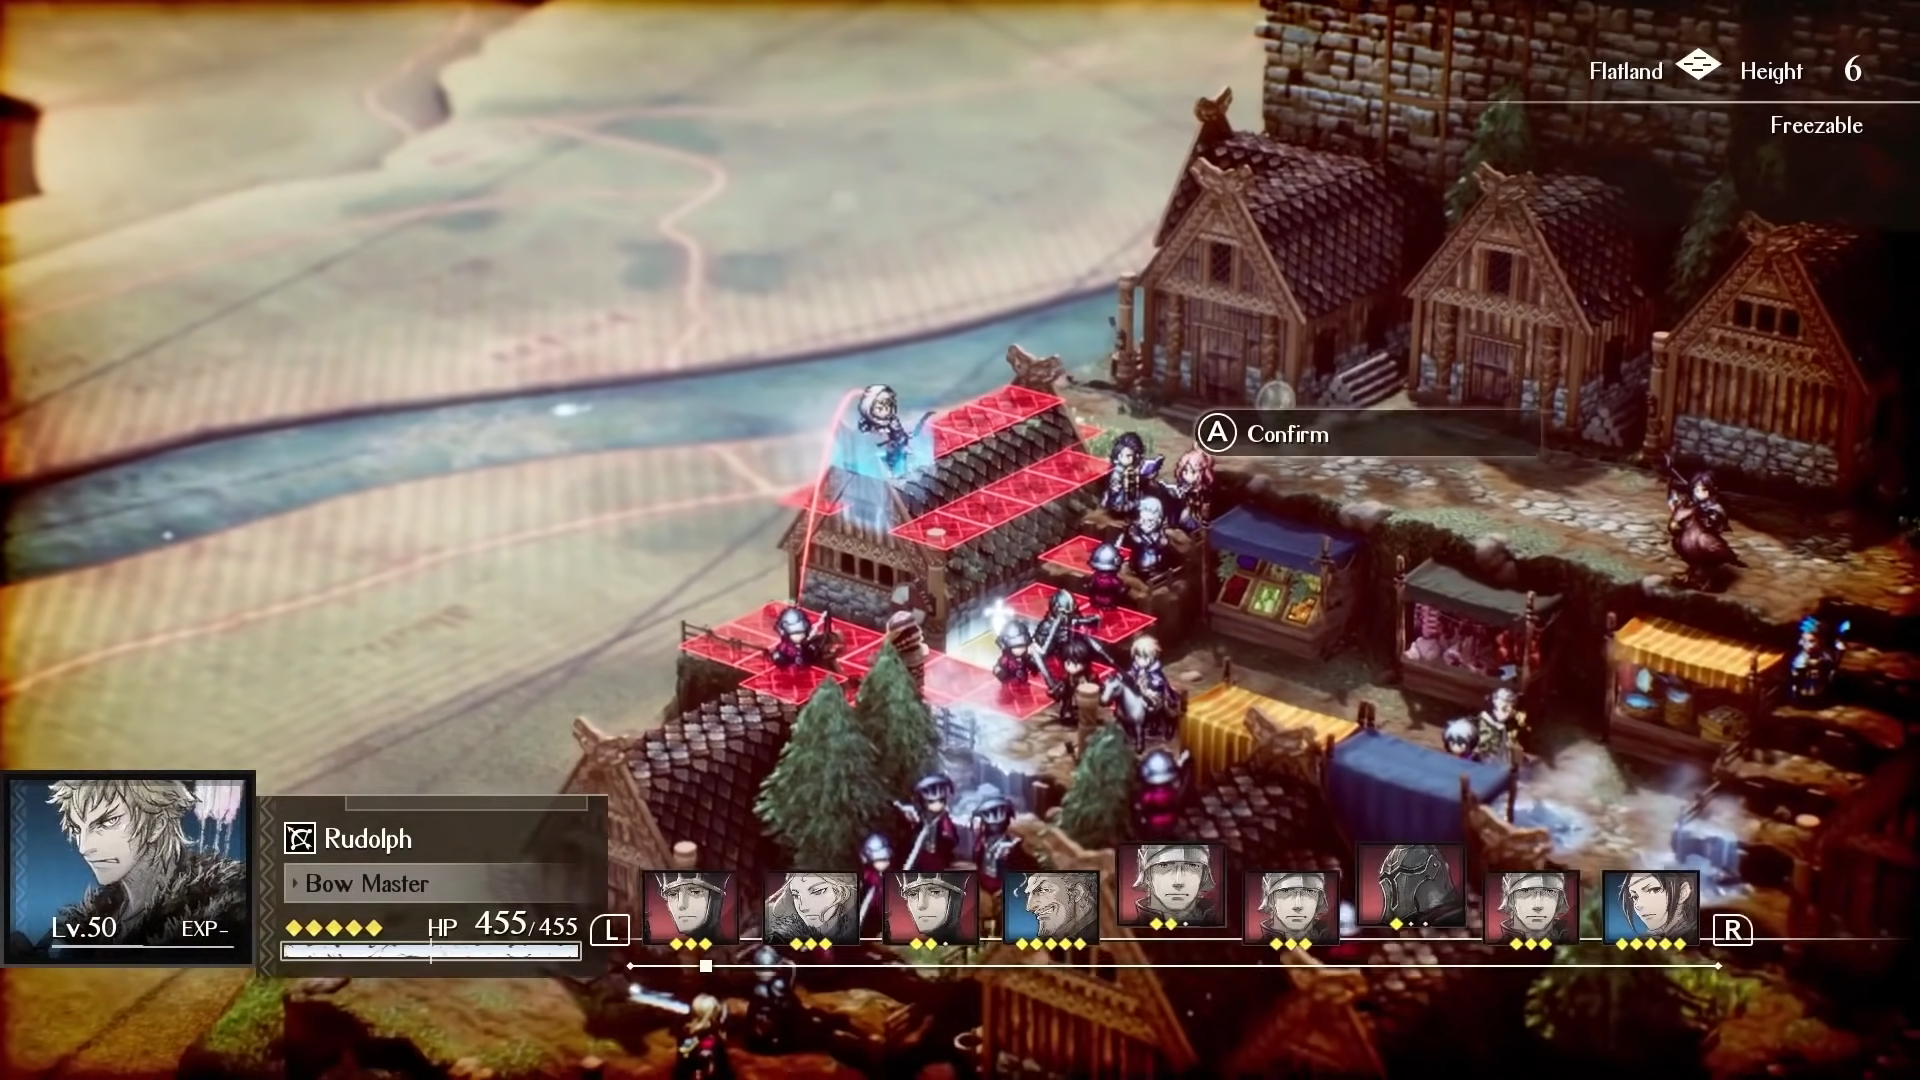 Project Triangle Strategy - Octopath Traveler follow-up announced for Switch  - Checkpoint